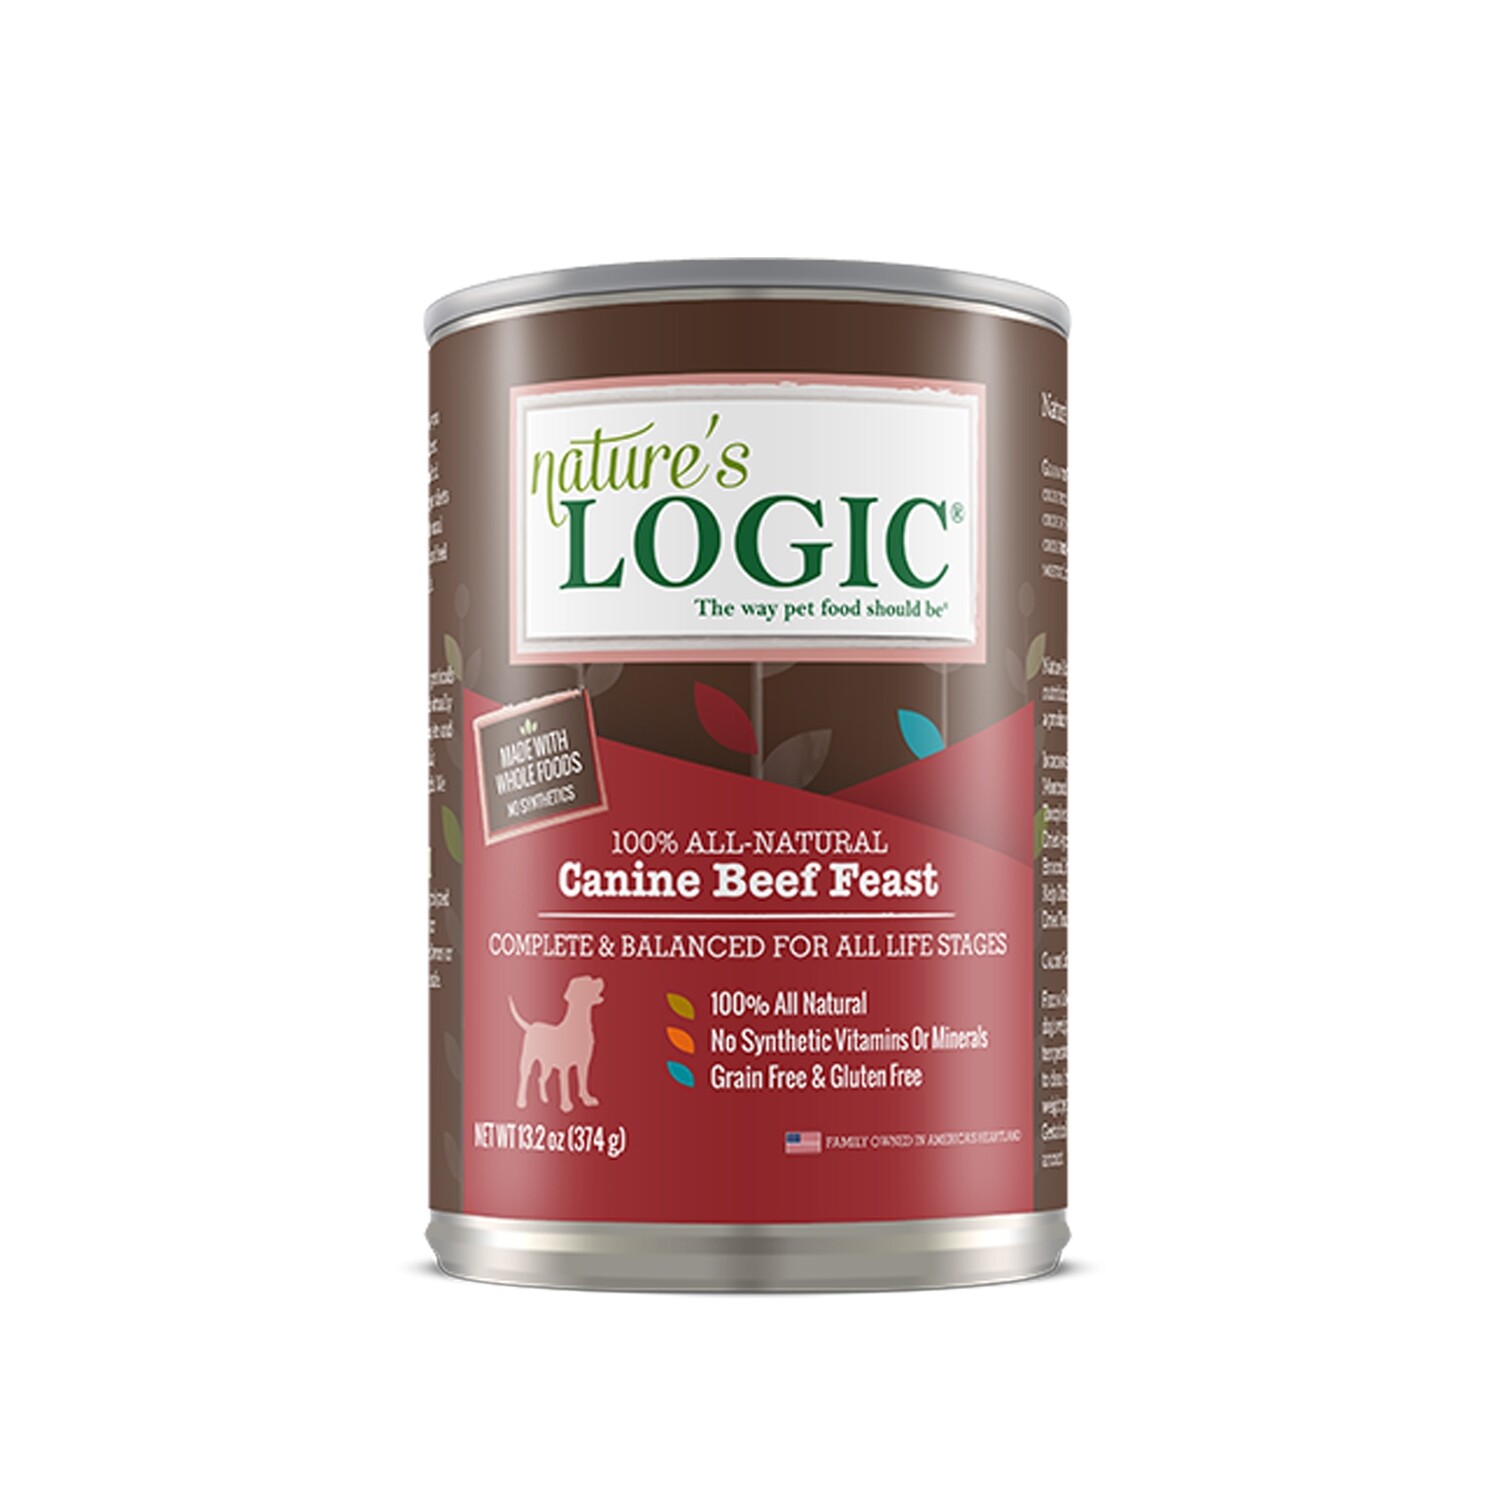 NATURE'S LOGIC - Canine Beef Feast Dog Can Food-13.2oz 狗狗牛肉罐头